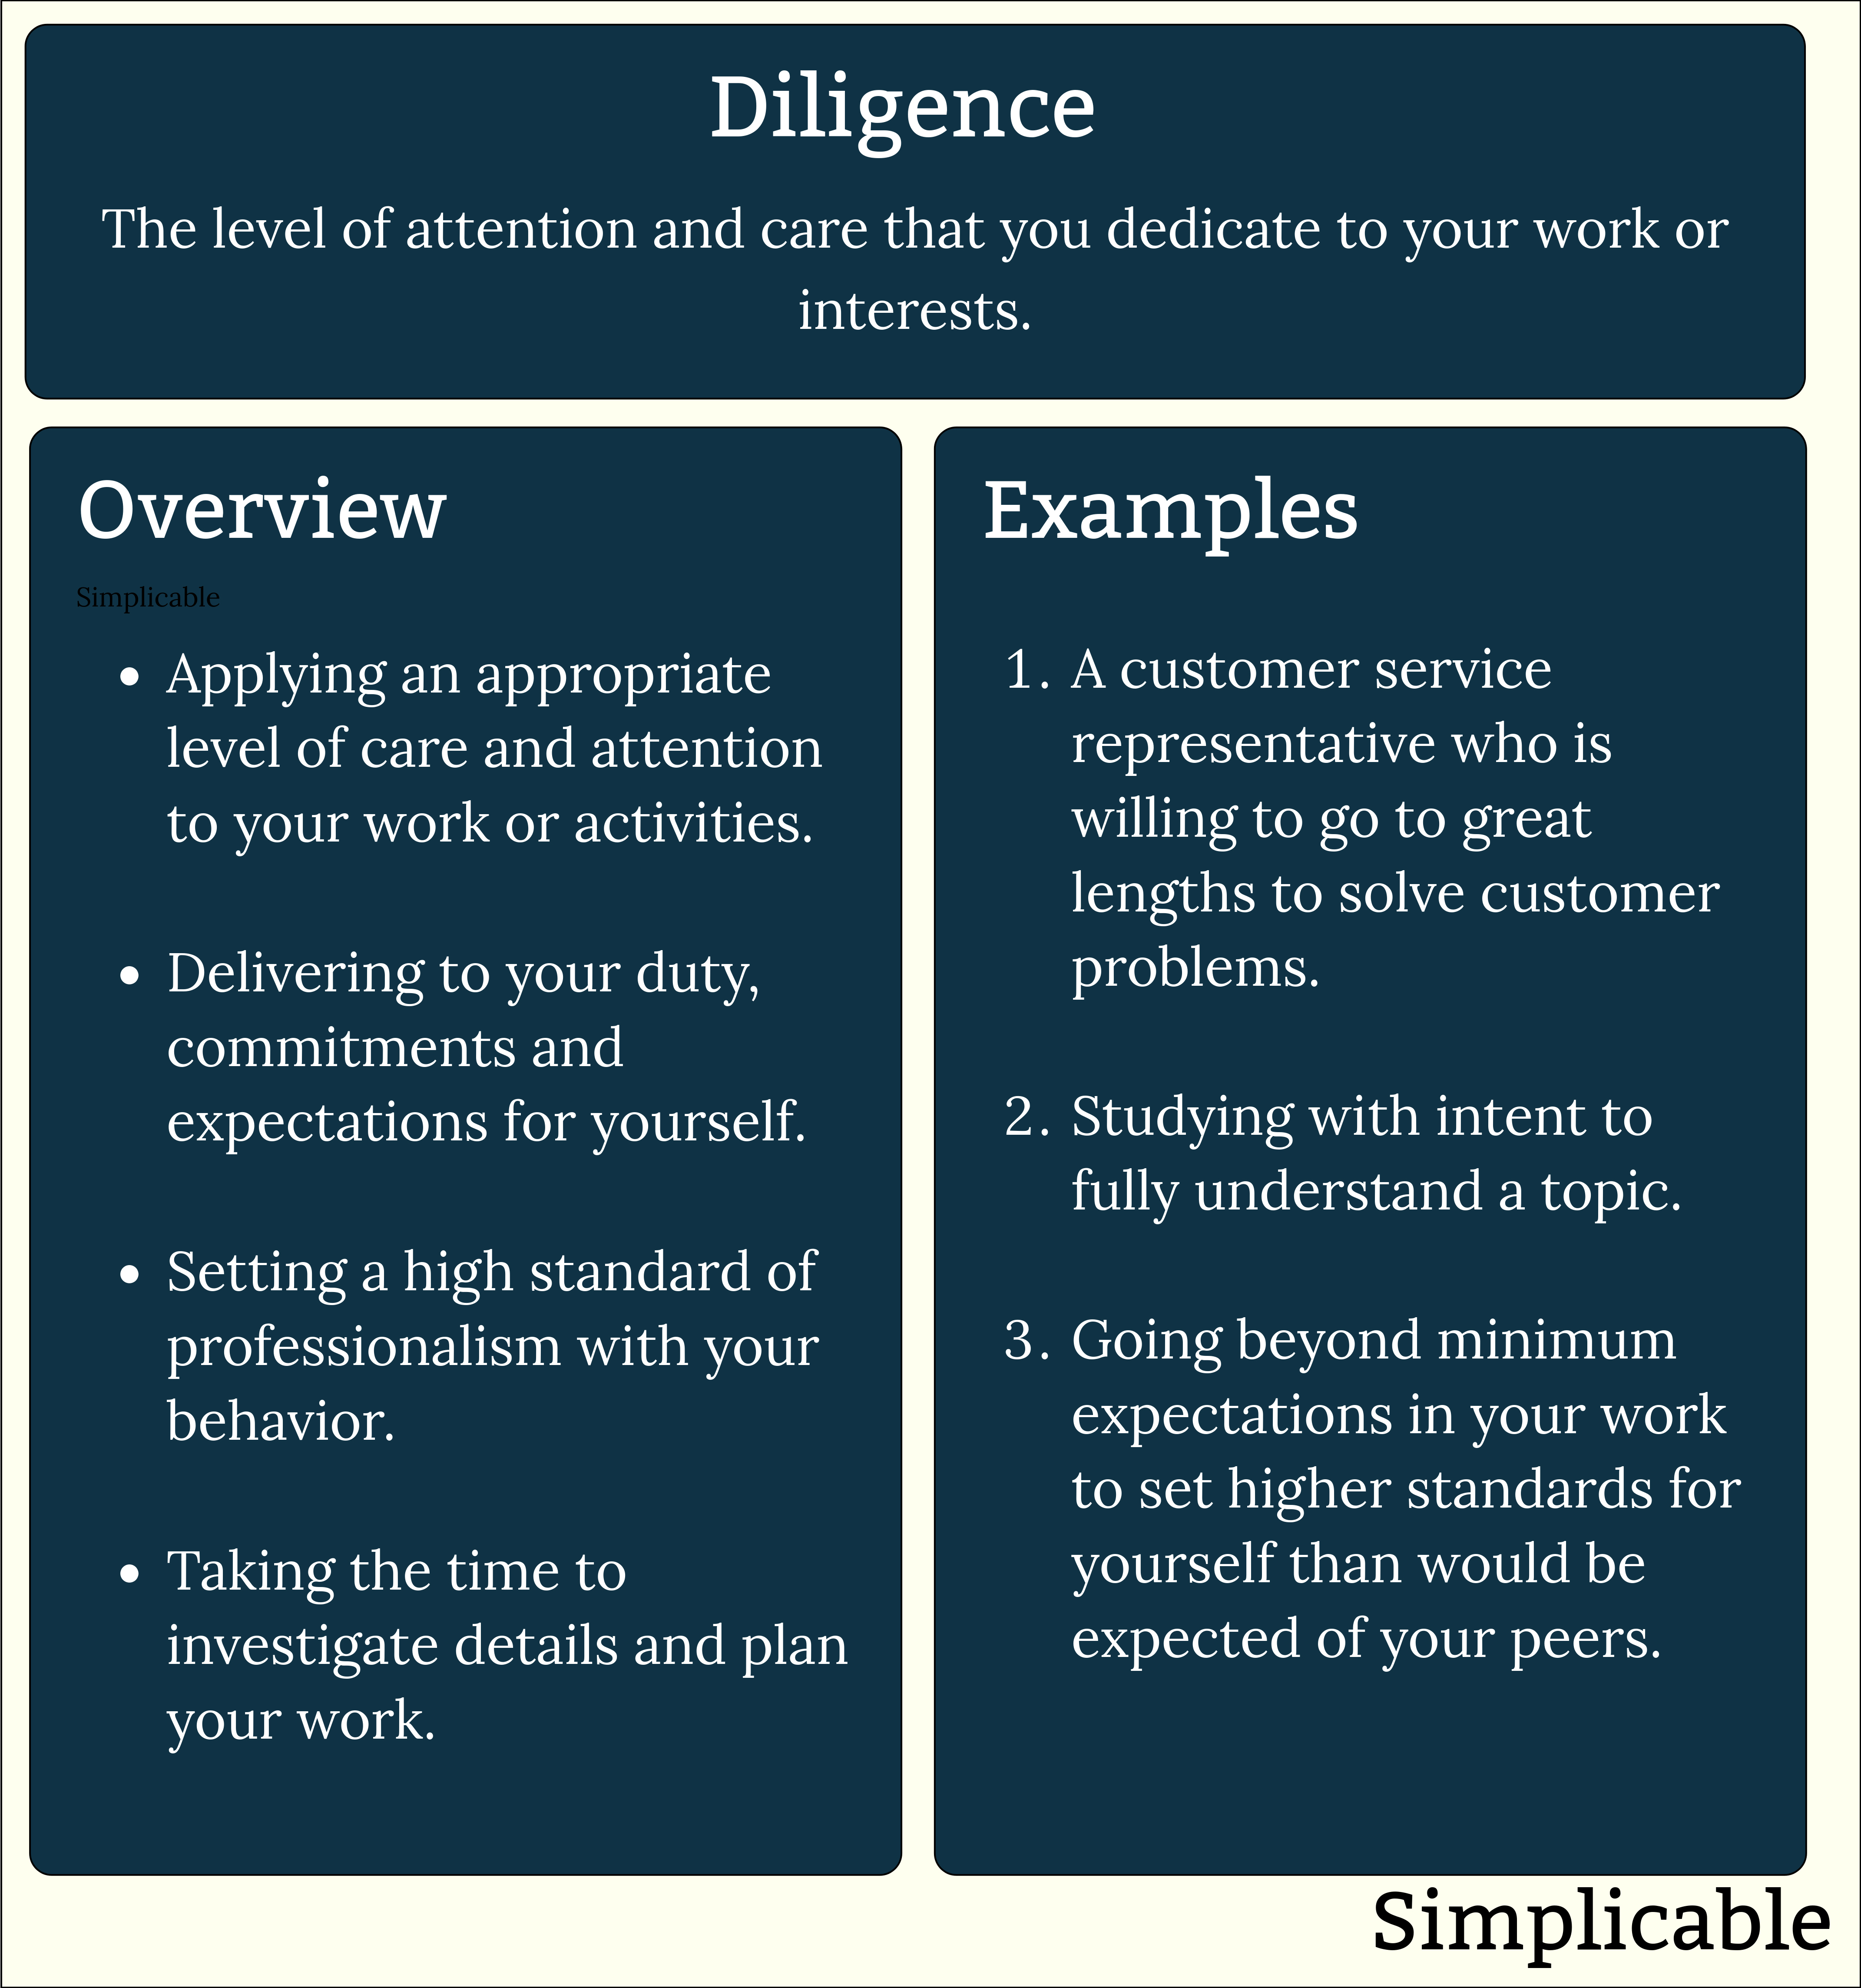 diligence definition and examples